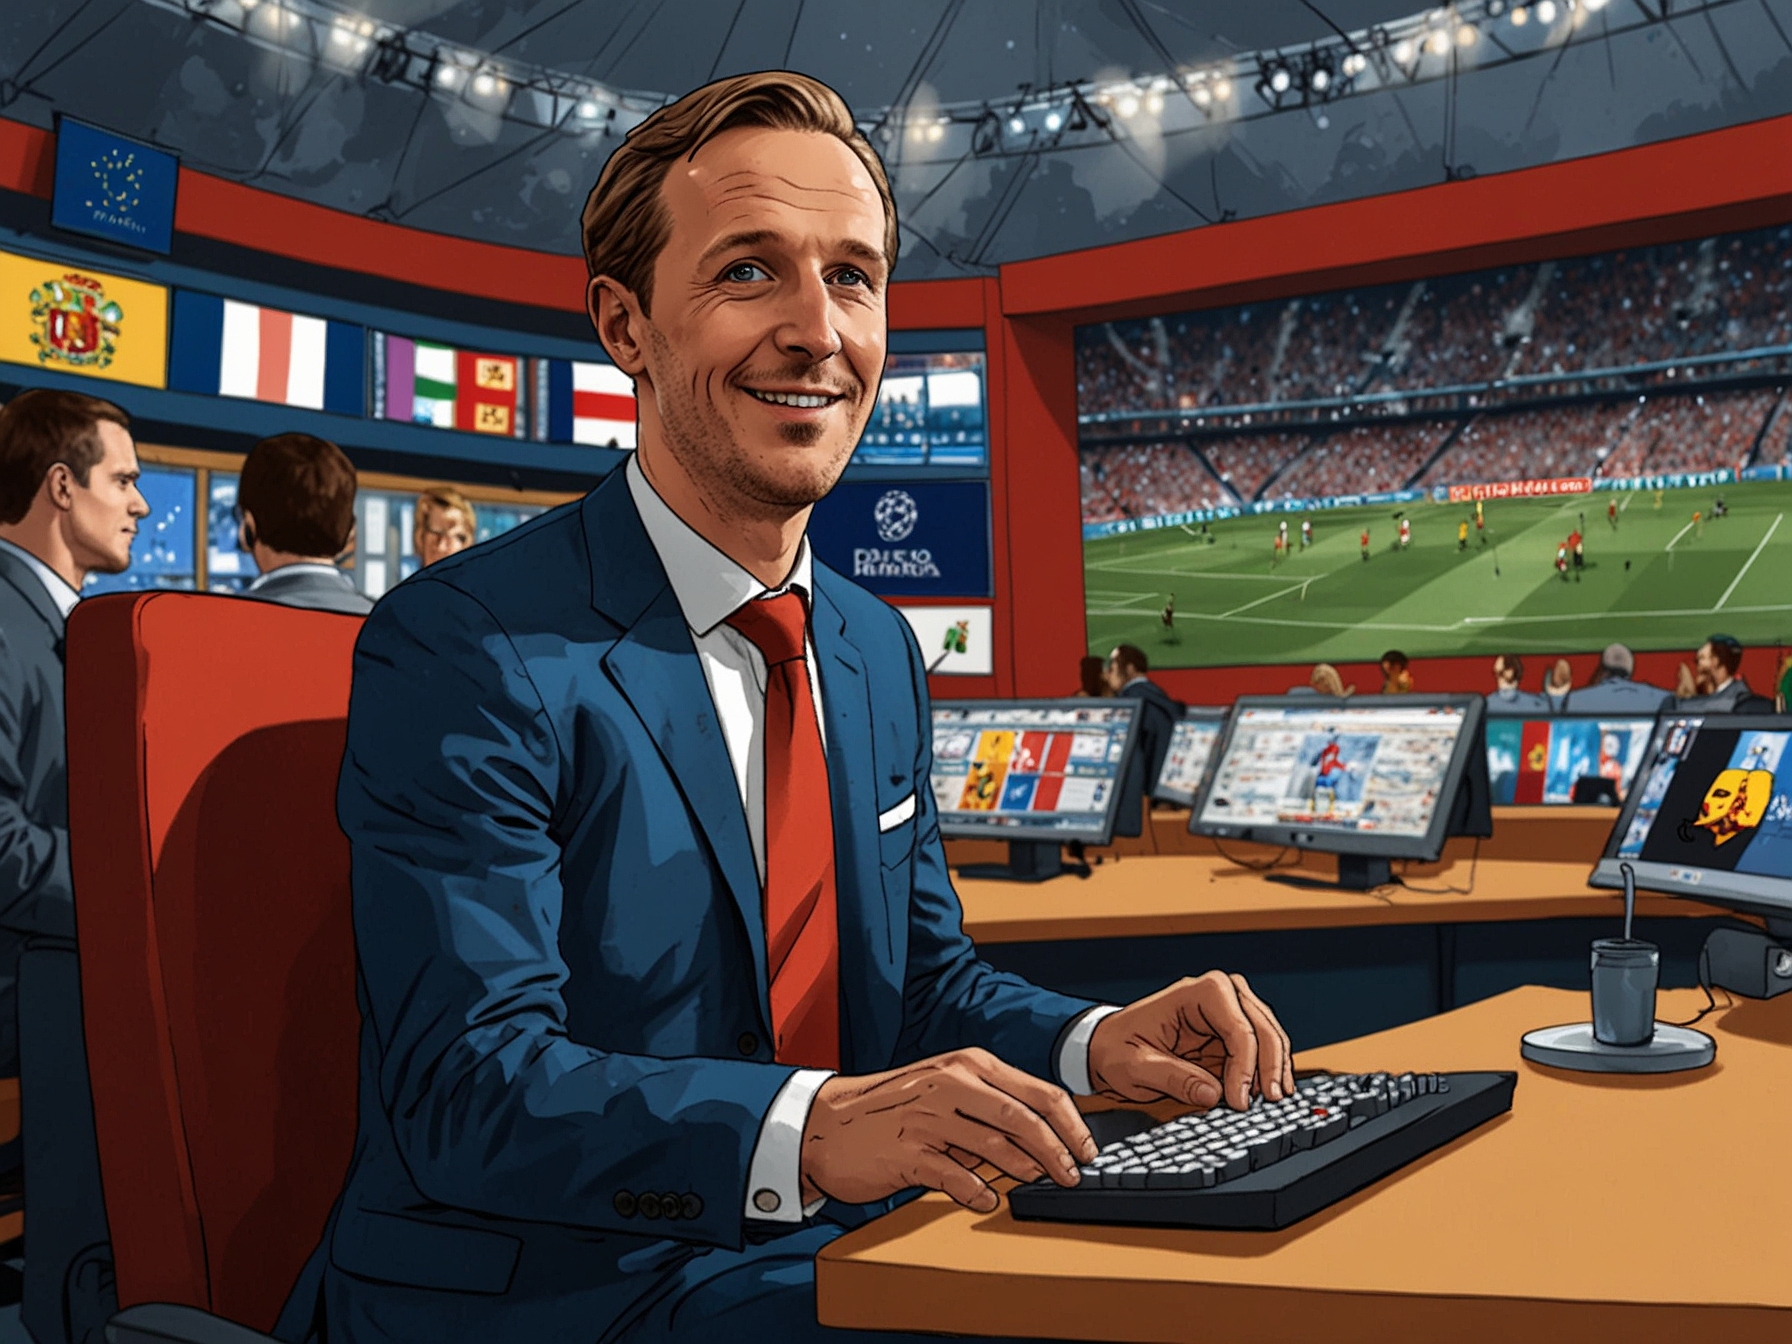 A viewer's perspective shows the BBC's EUROS coverage, blending football analysis with humor and playful banter, illustrating the broadcasters' attempt to modernize sports commentary.